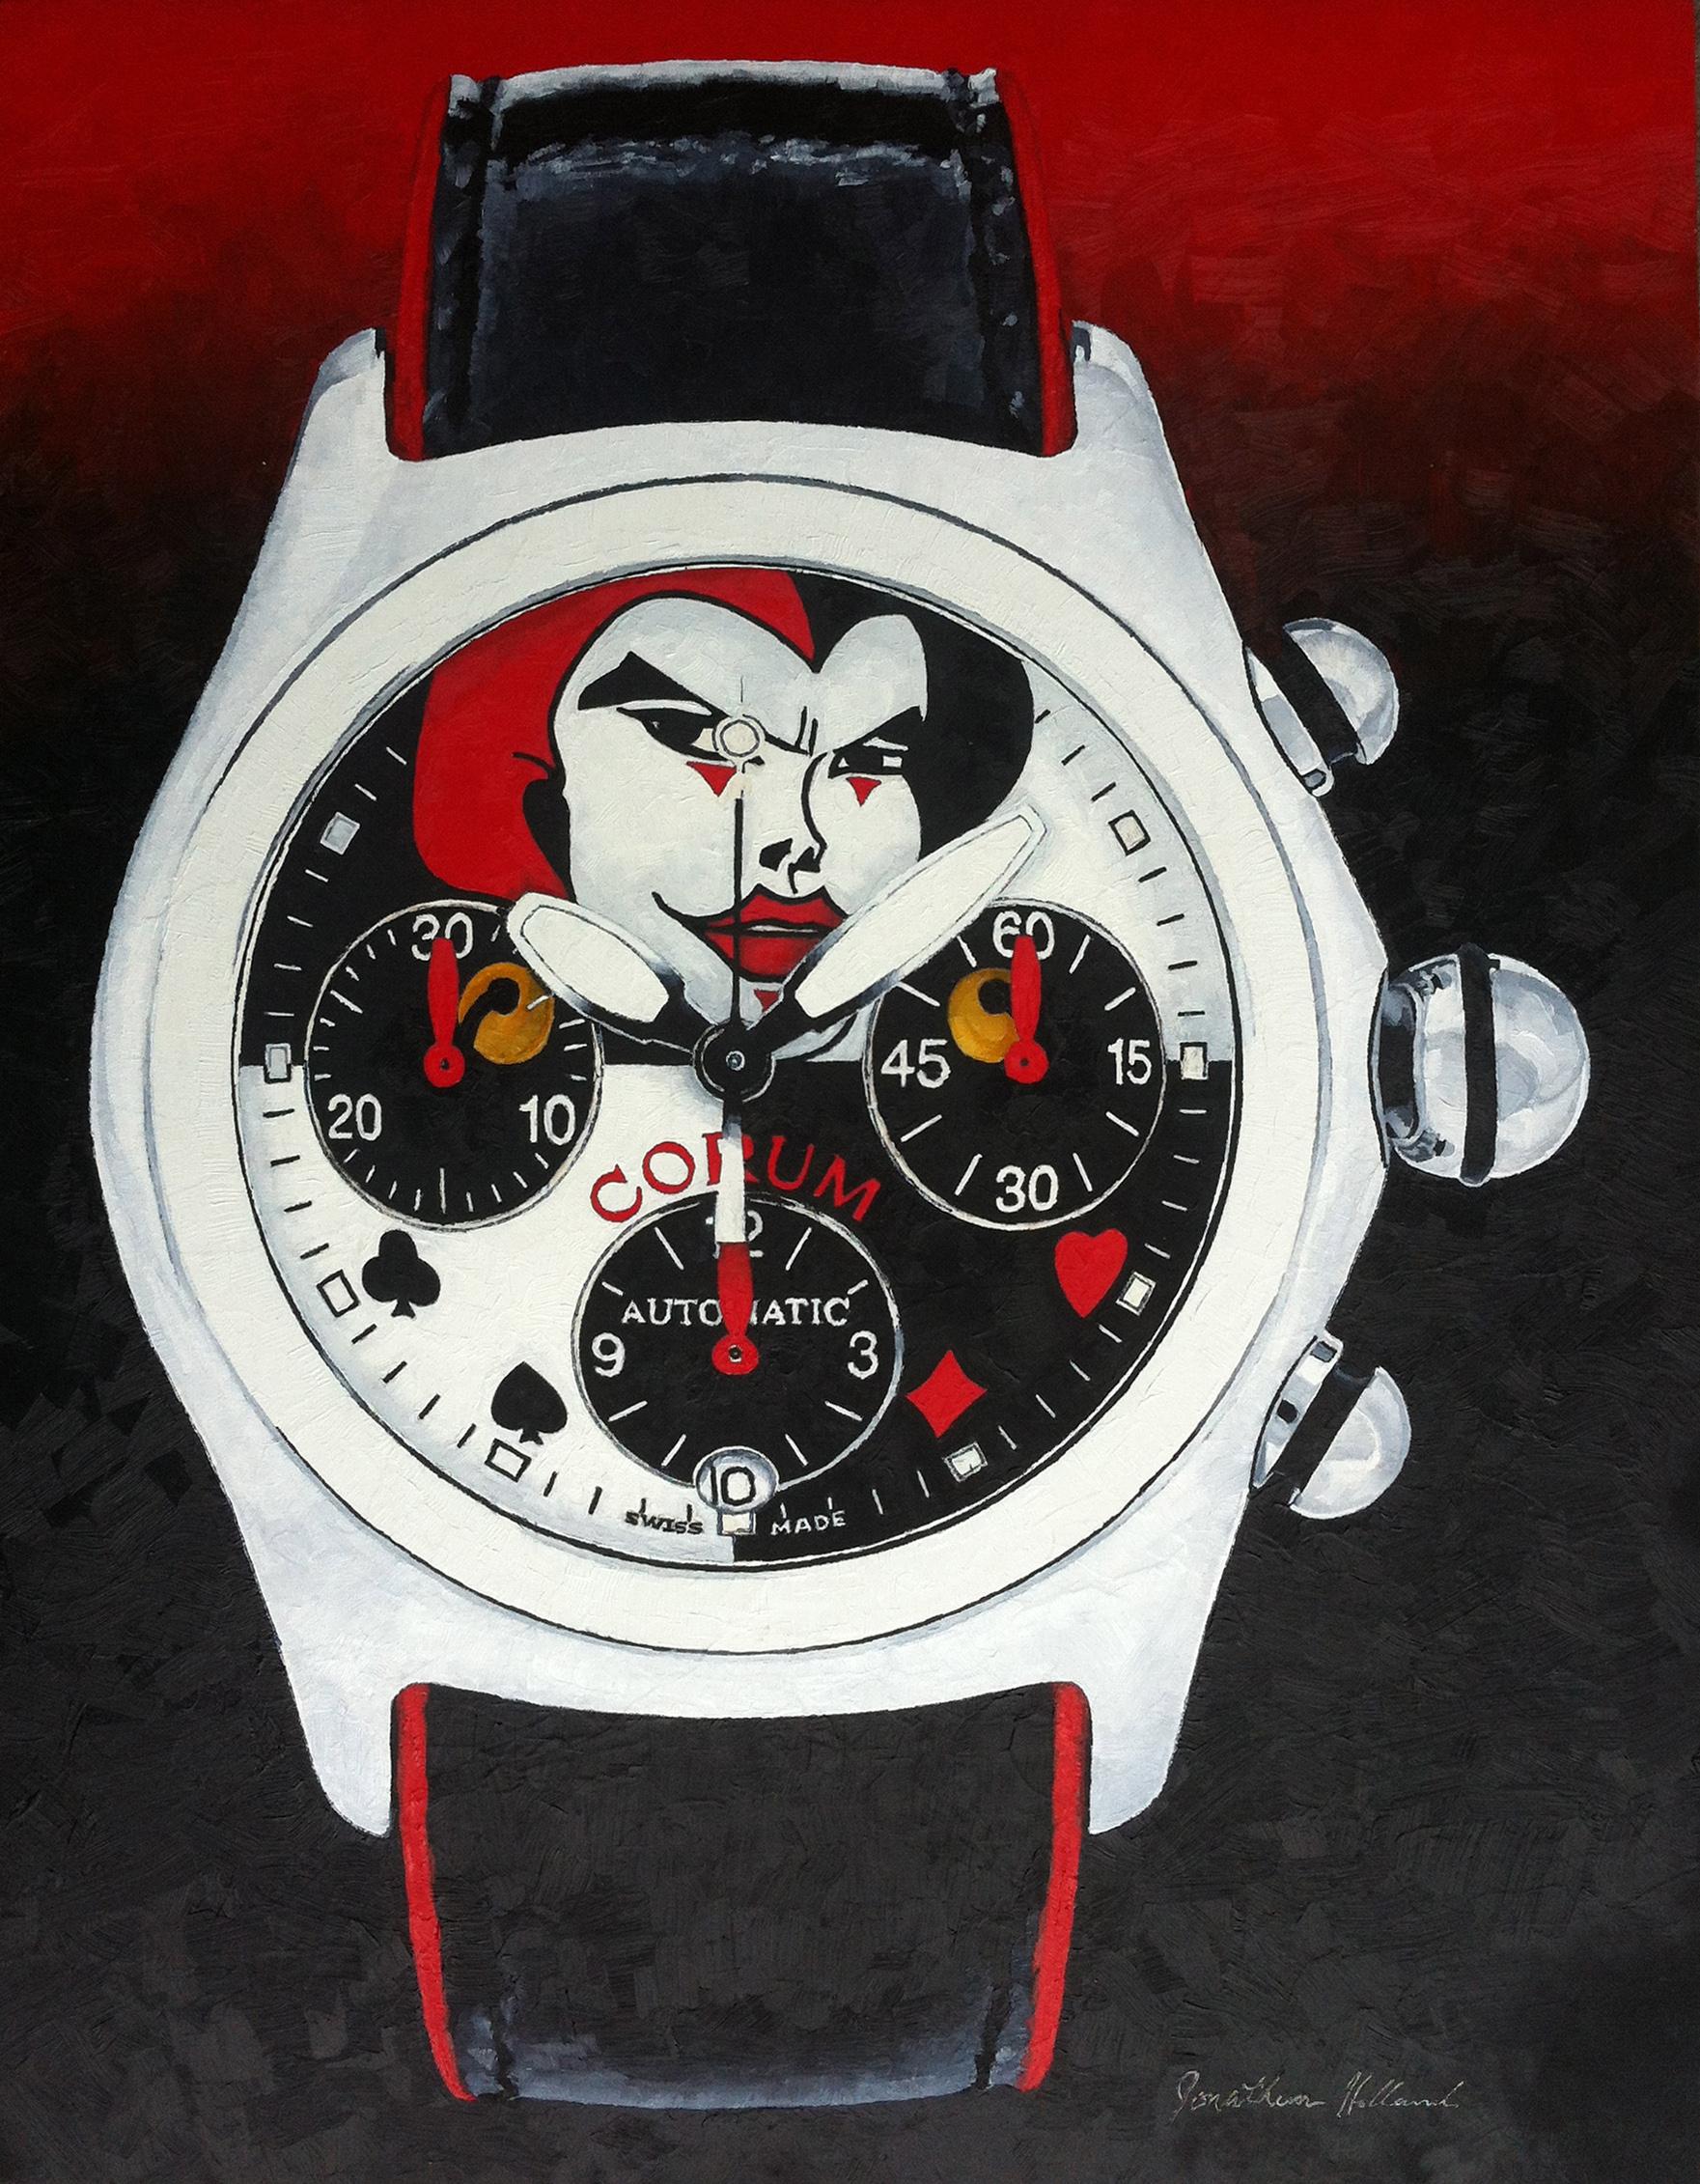 Corum Joker Calendar Chronograph wristwatch painting by Jonathan Holland.

This beautiful painting captures one of the most sought after timepieces in history. This being the Corum Joker Calendar Chronograph wristwatch. Created by hand, oil paints